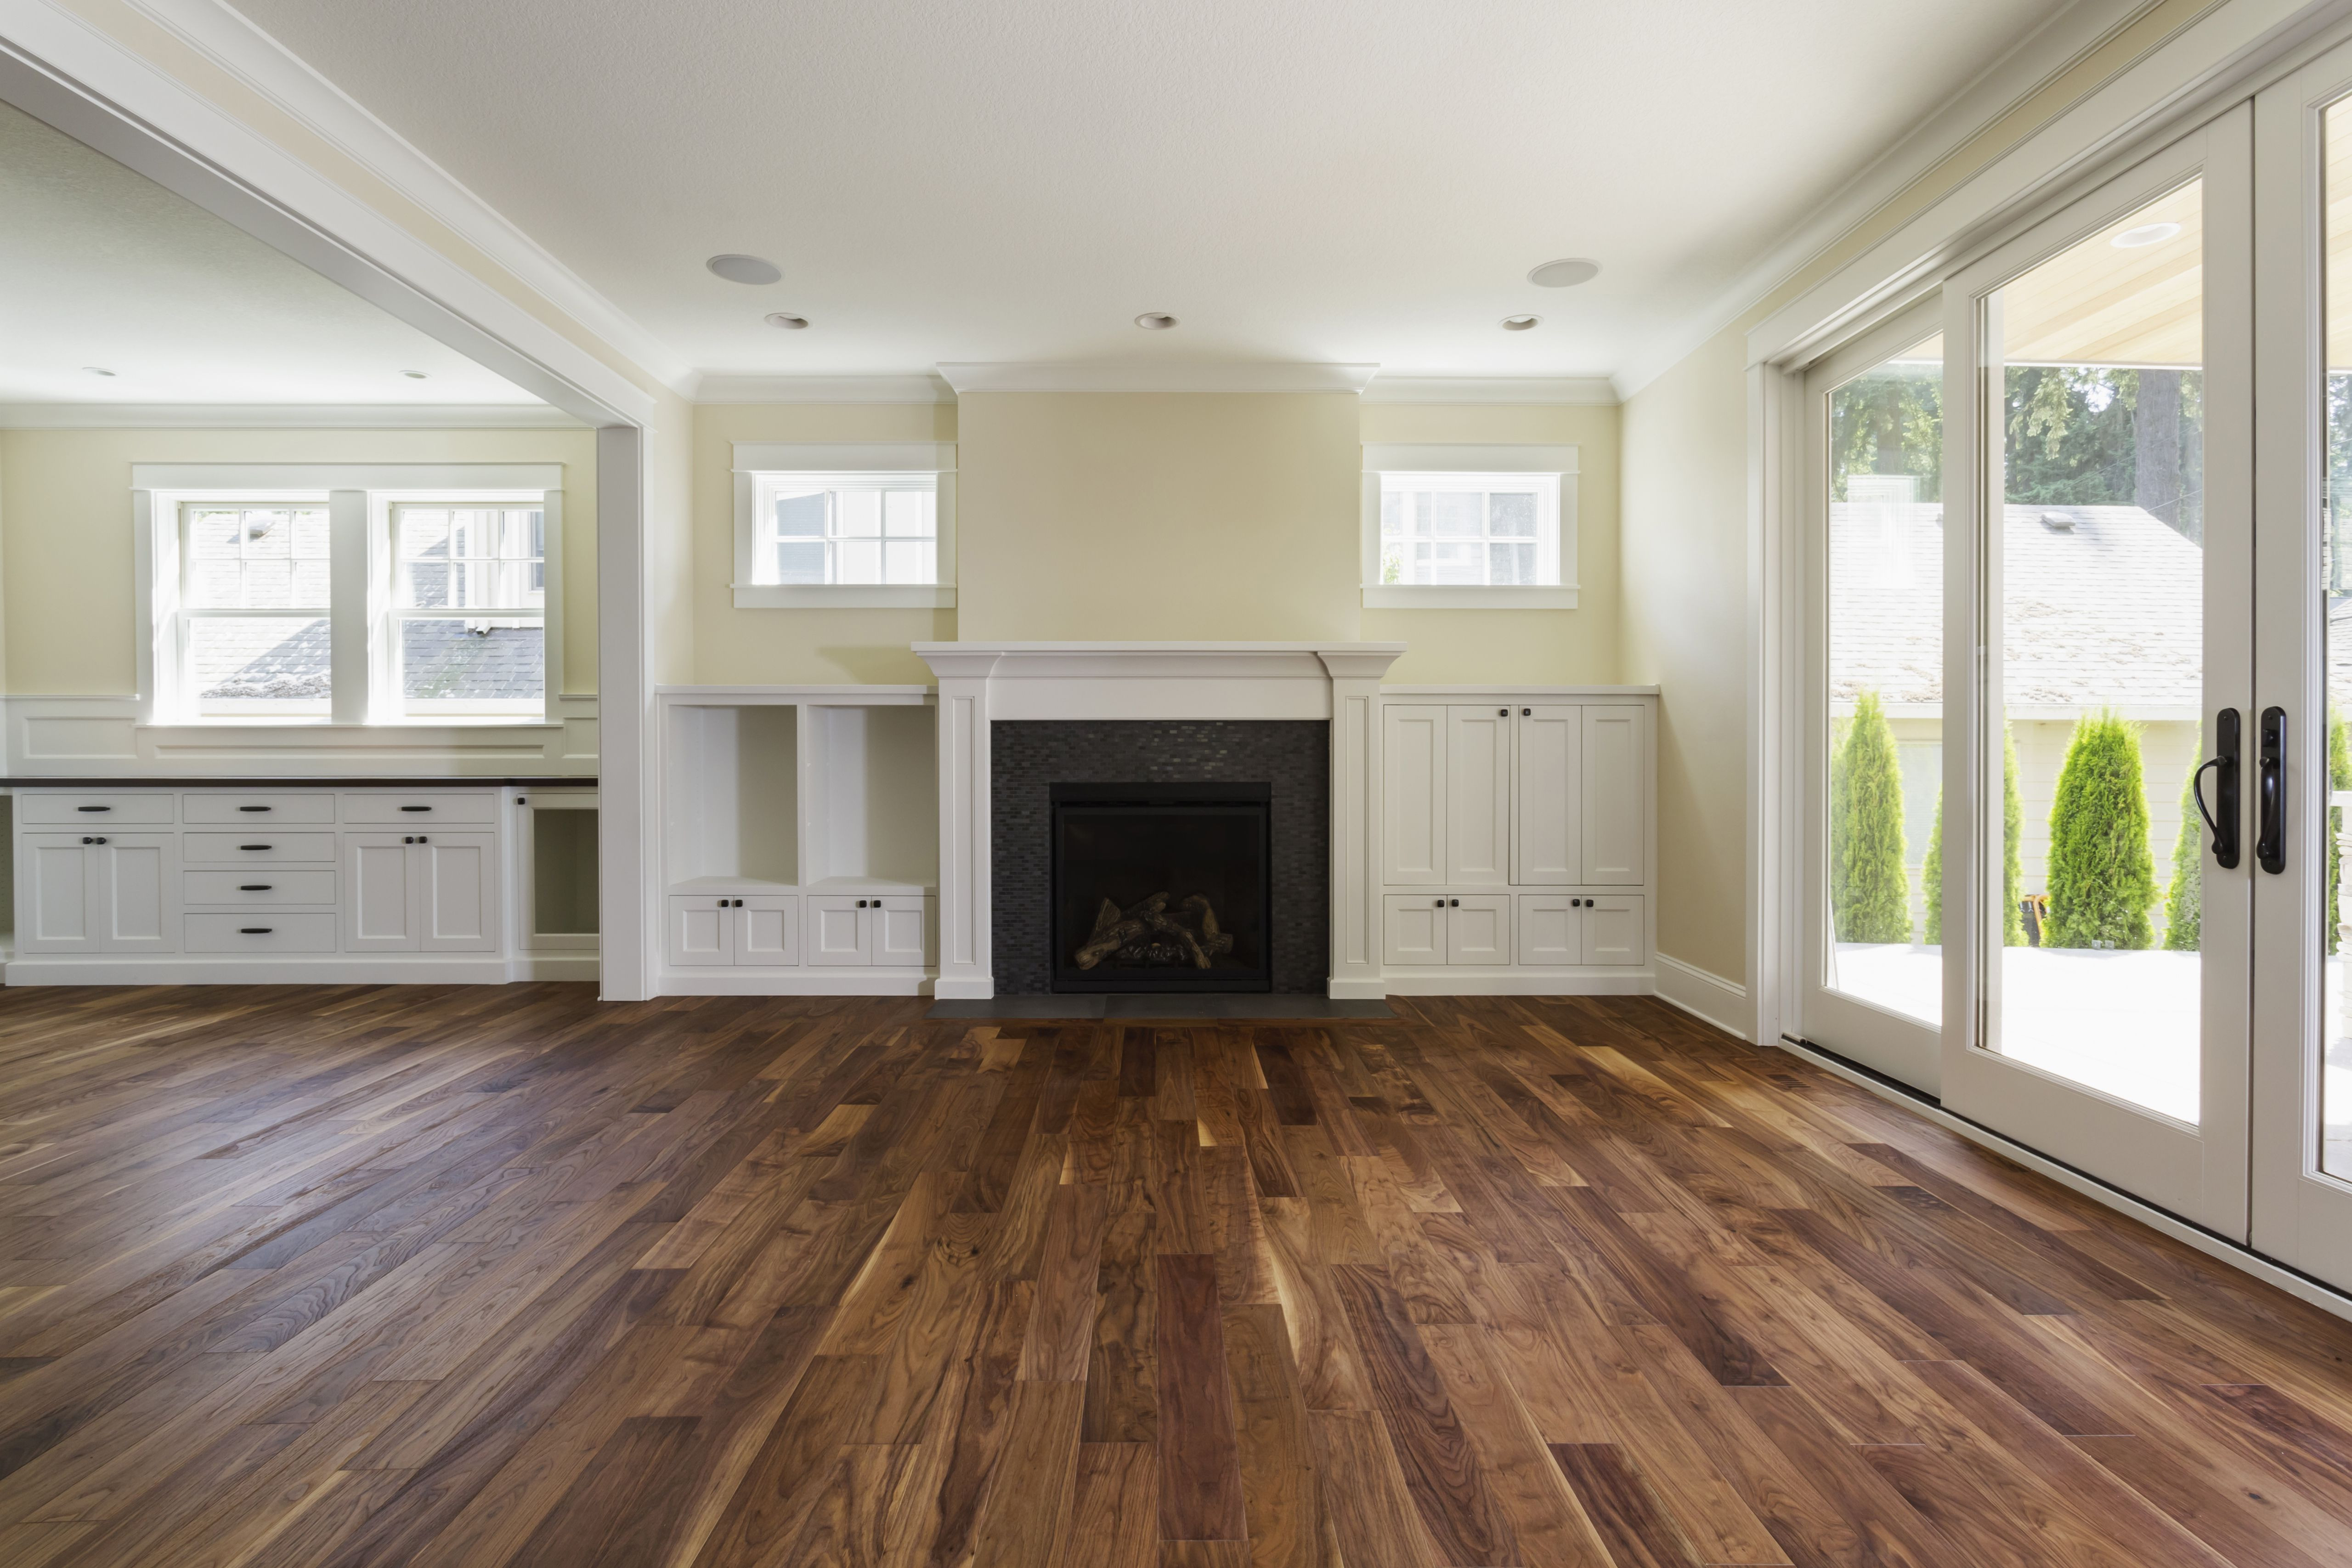 15 Wonderful Rustic Hardwood Flooring Canada 2024 free download rustic hardwood flooring canada of the pros and cons of prefinished hardwood flooring with regard to fireplace and built in shelves in living room 482143011 57bef8e33df78cc16e035397